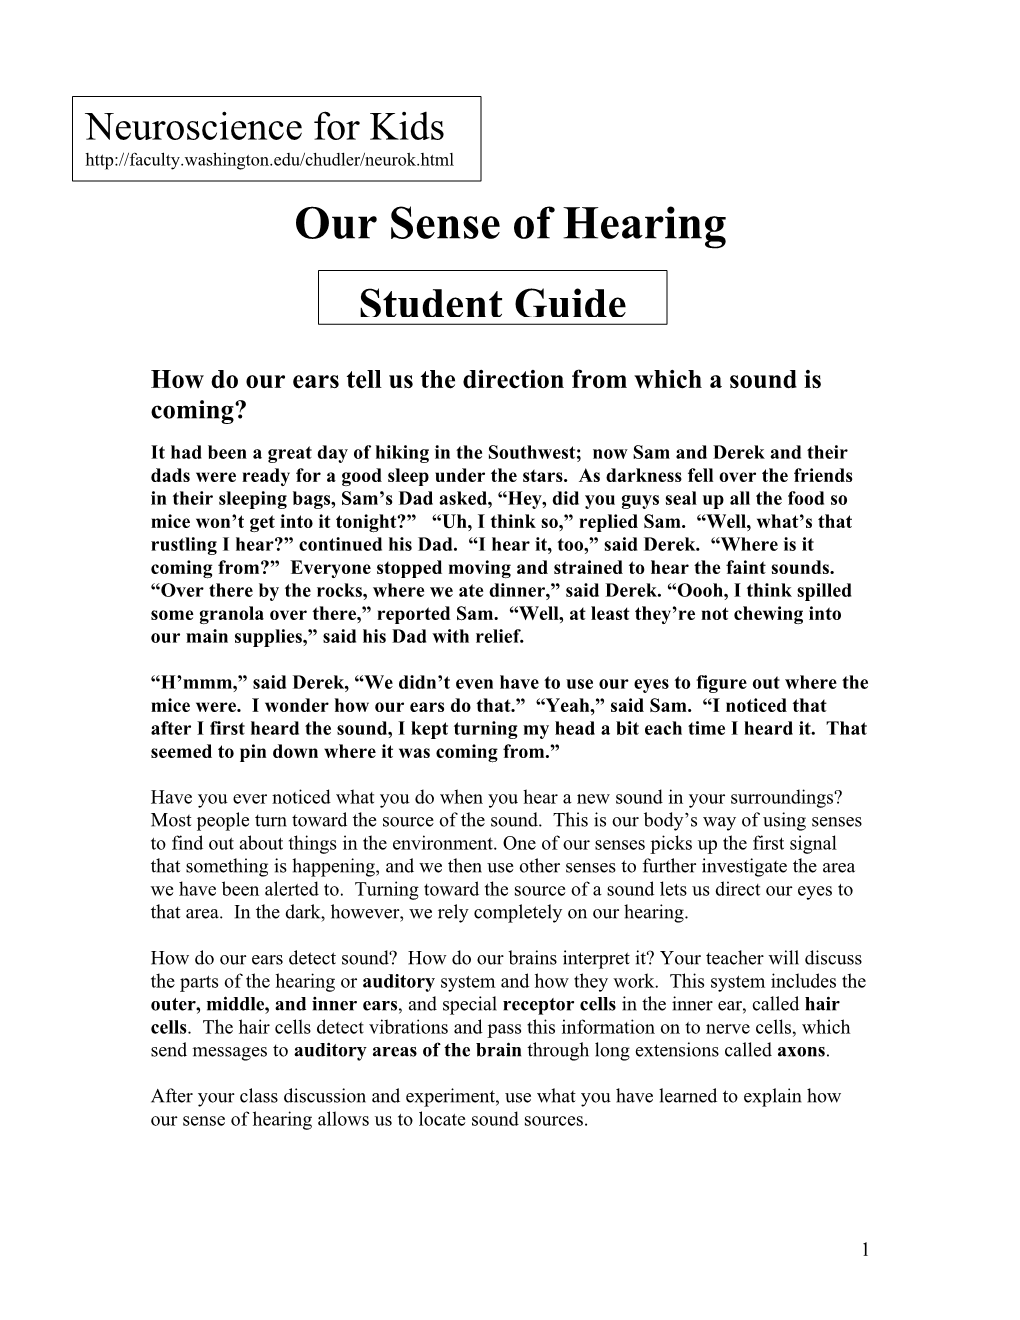 Our Sense of Hearing Student Guide